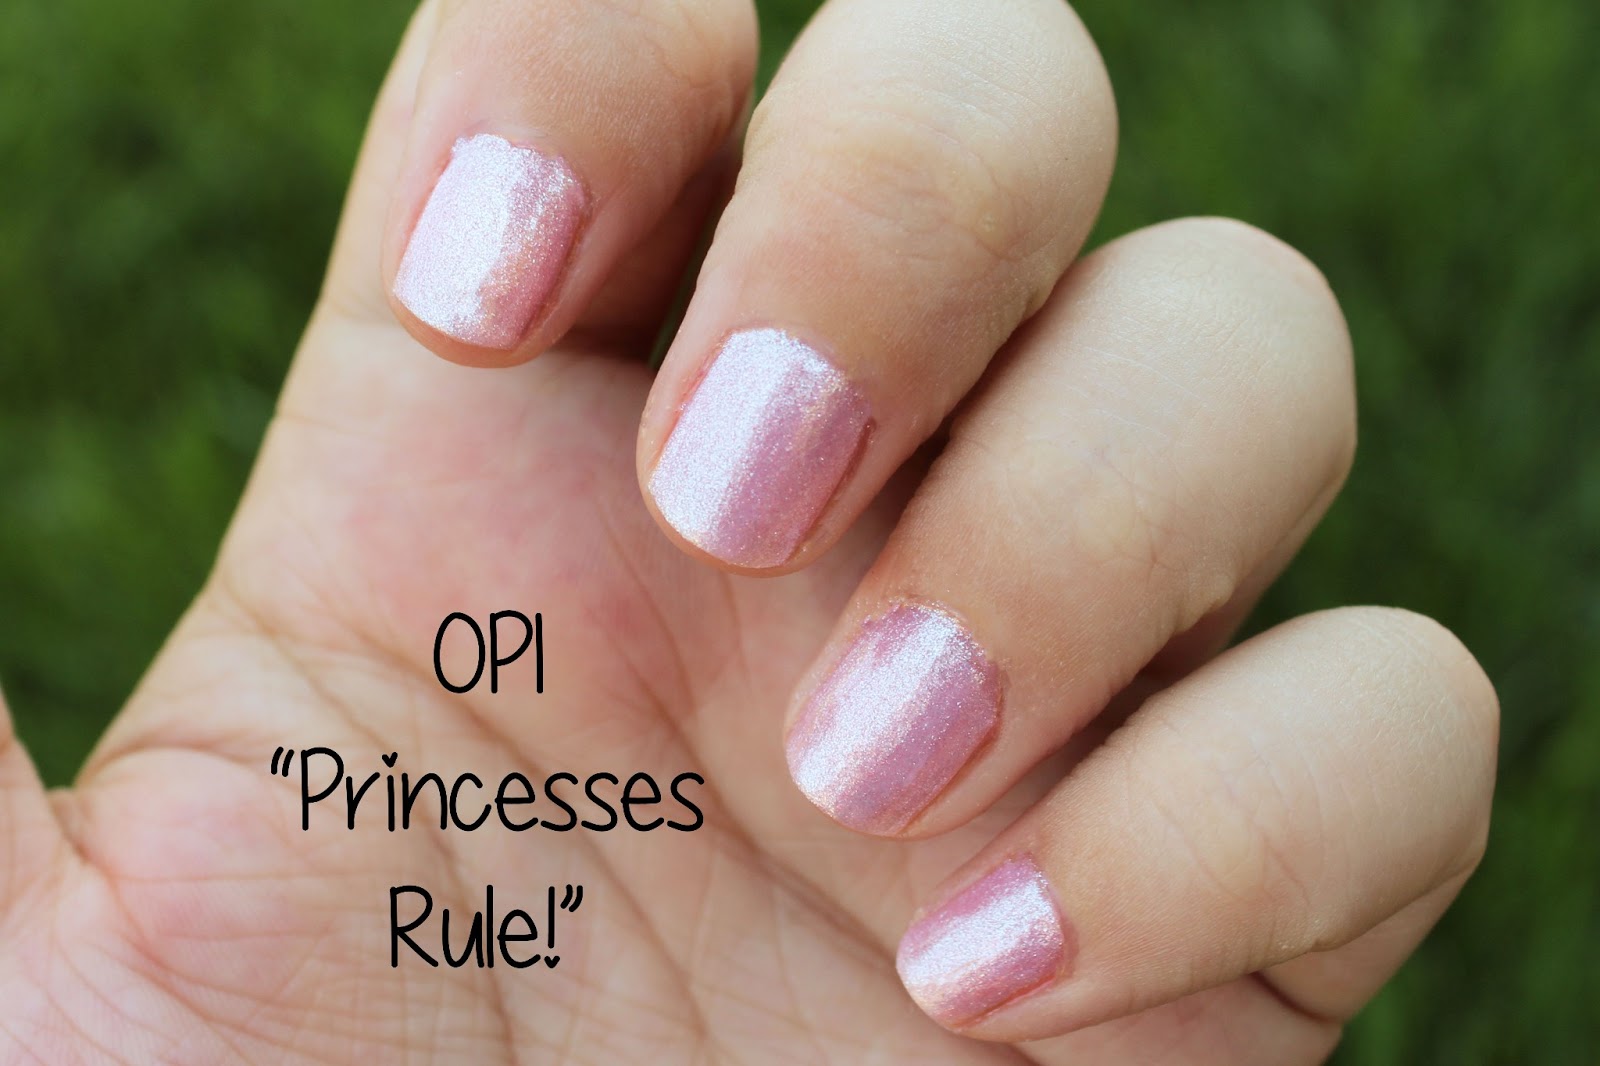 OPI Princesses Rule Nail Lacquer - wide 4